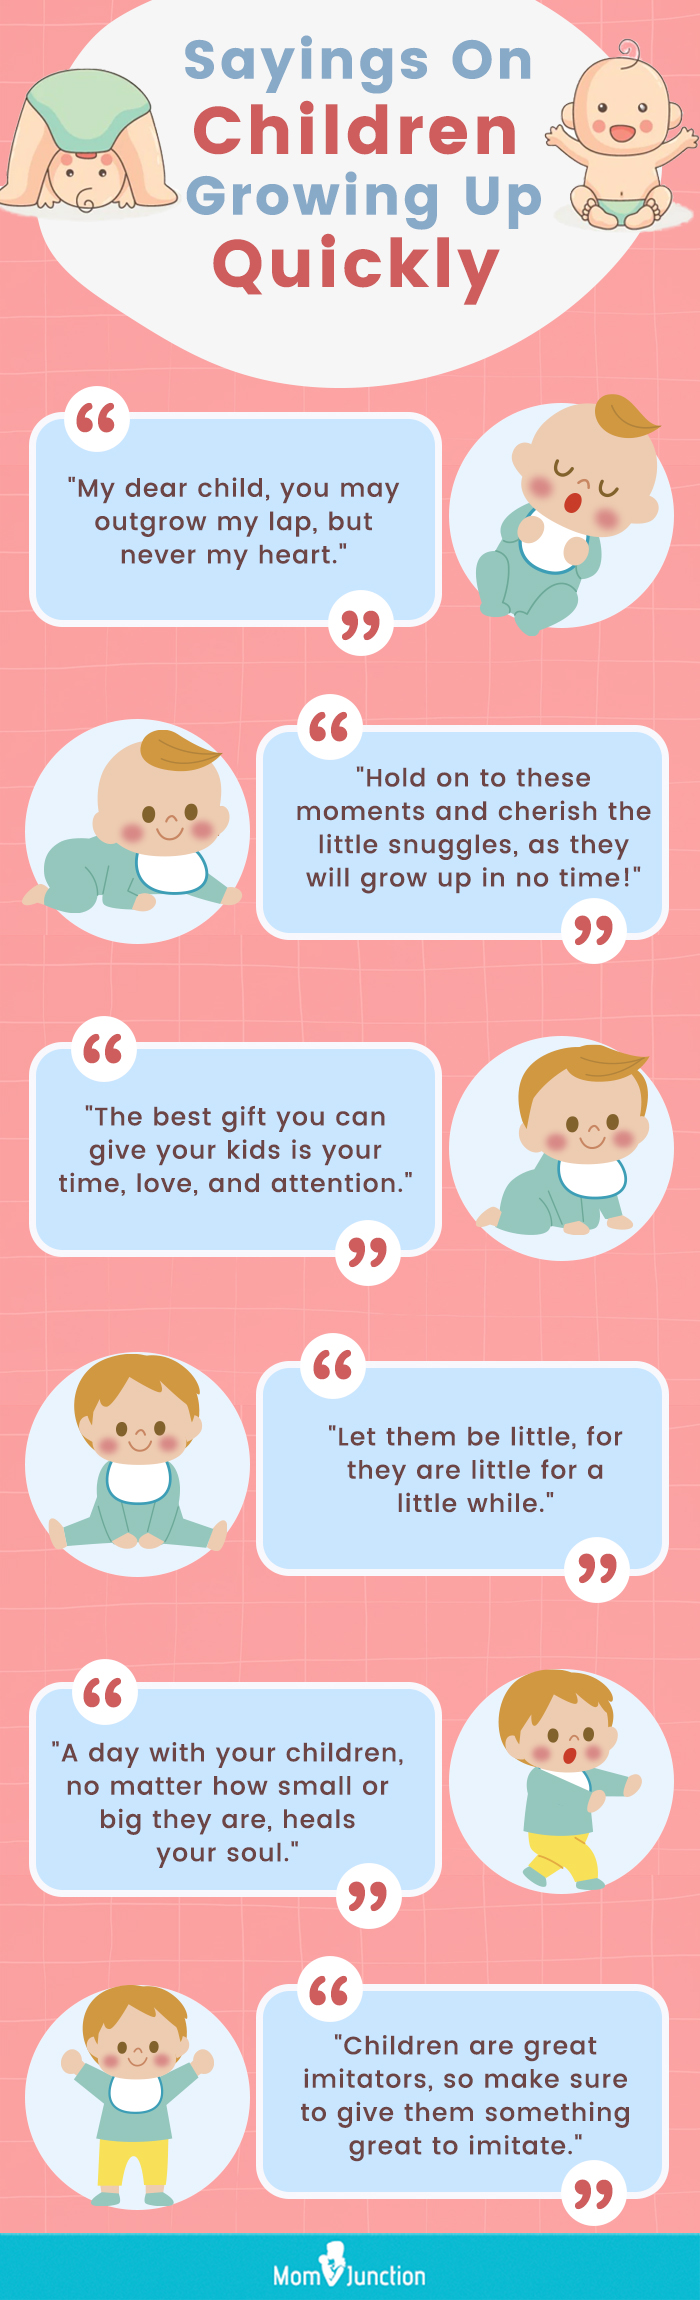 childhood memories quotes and sayings